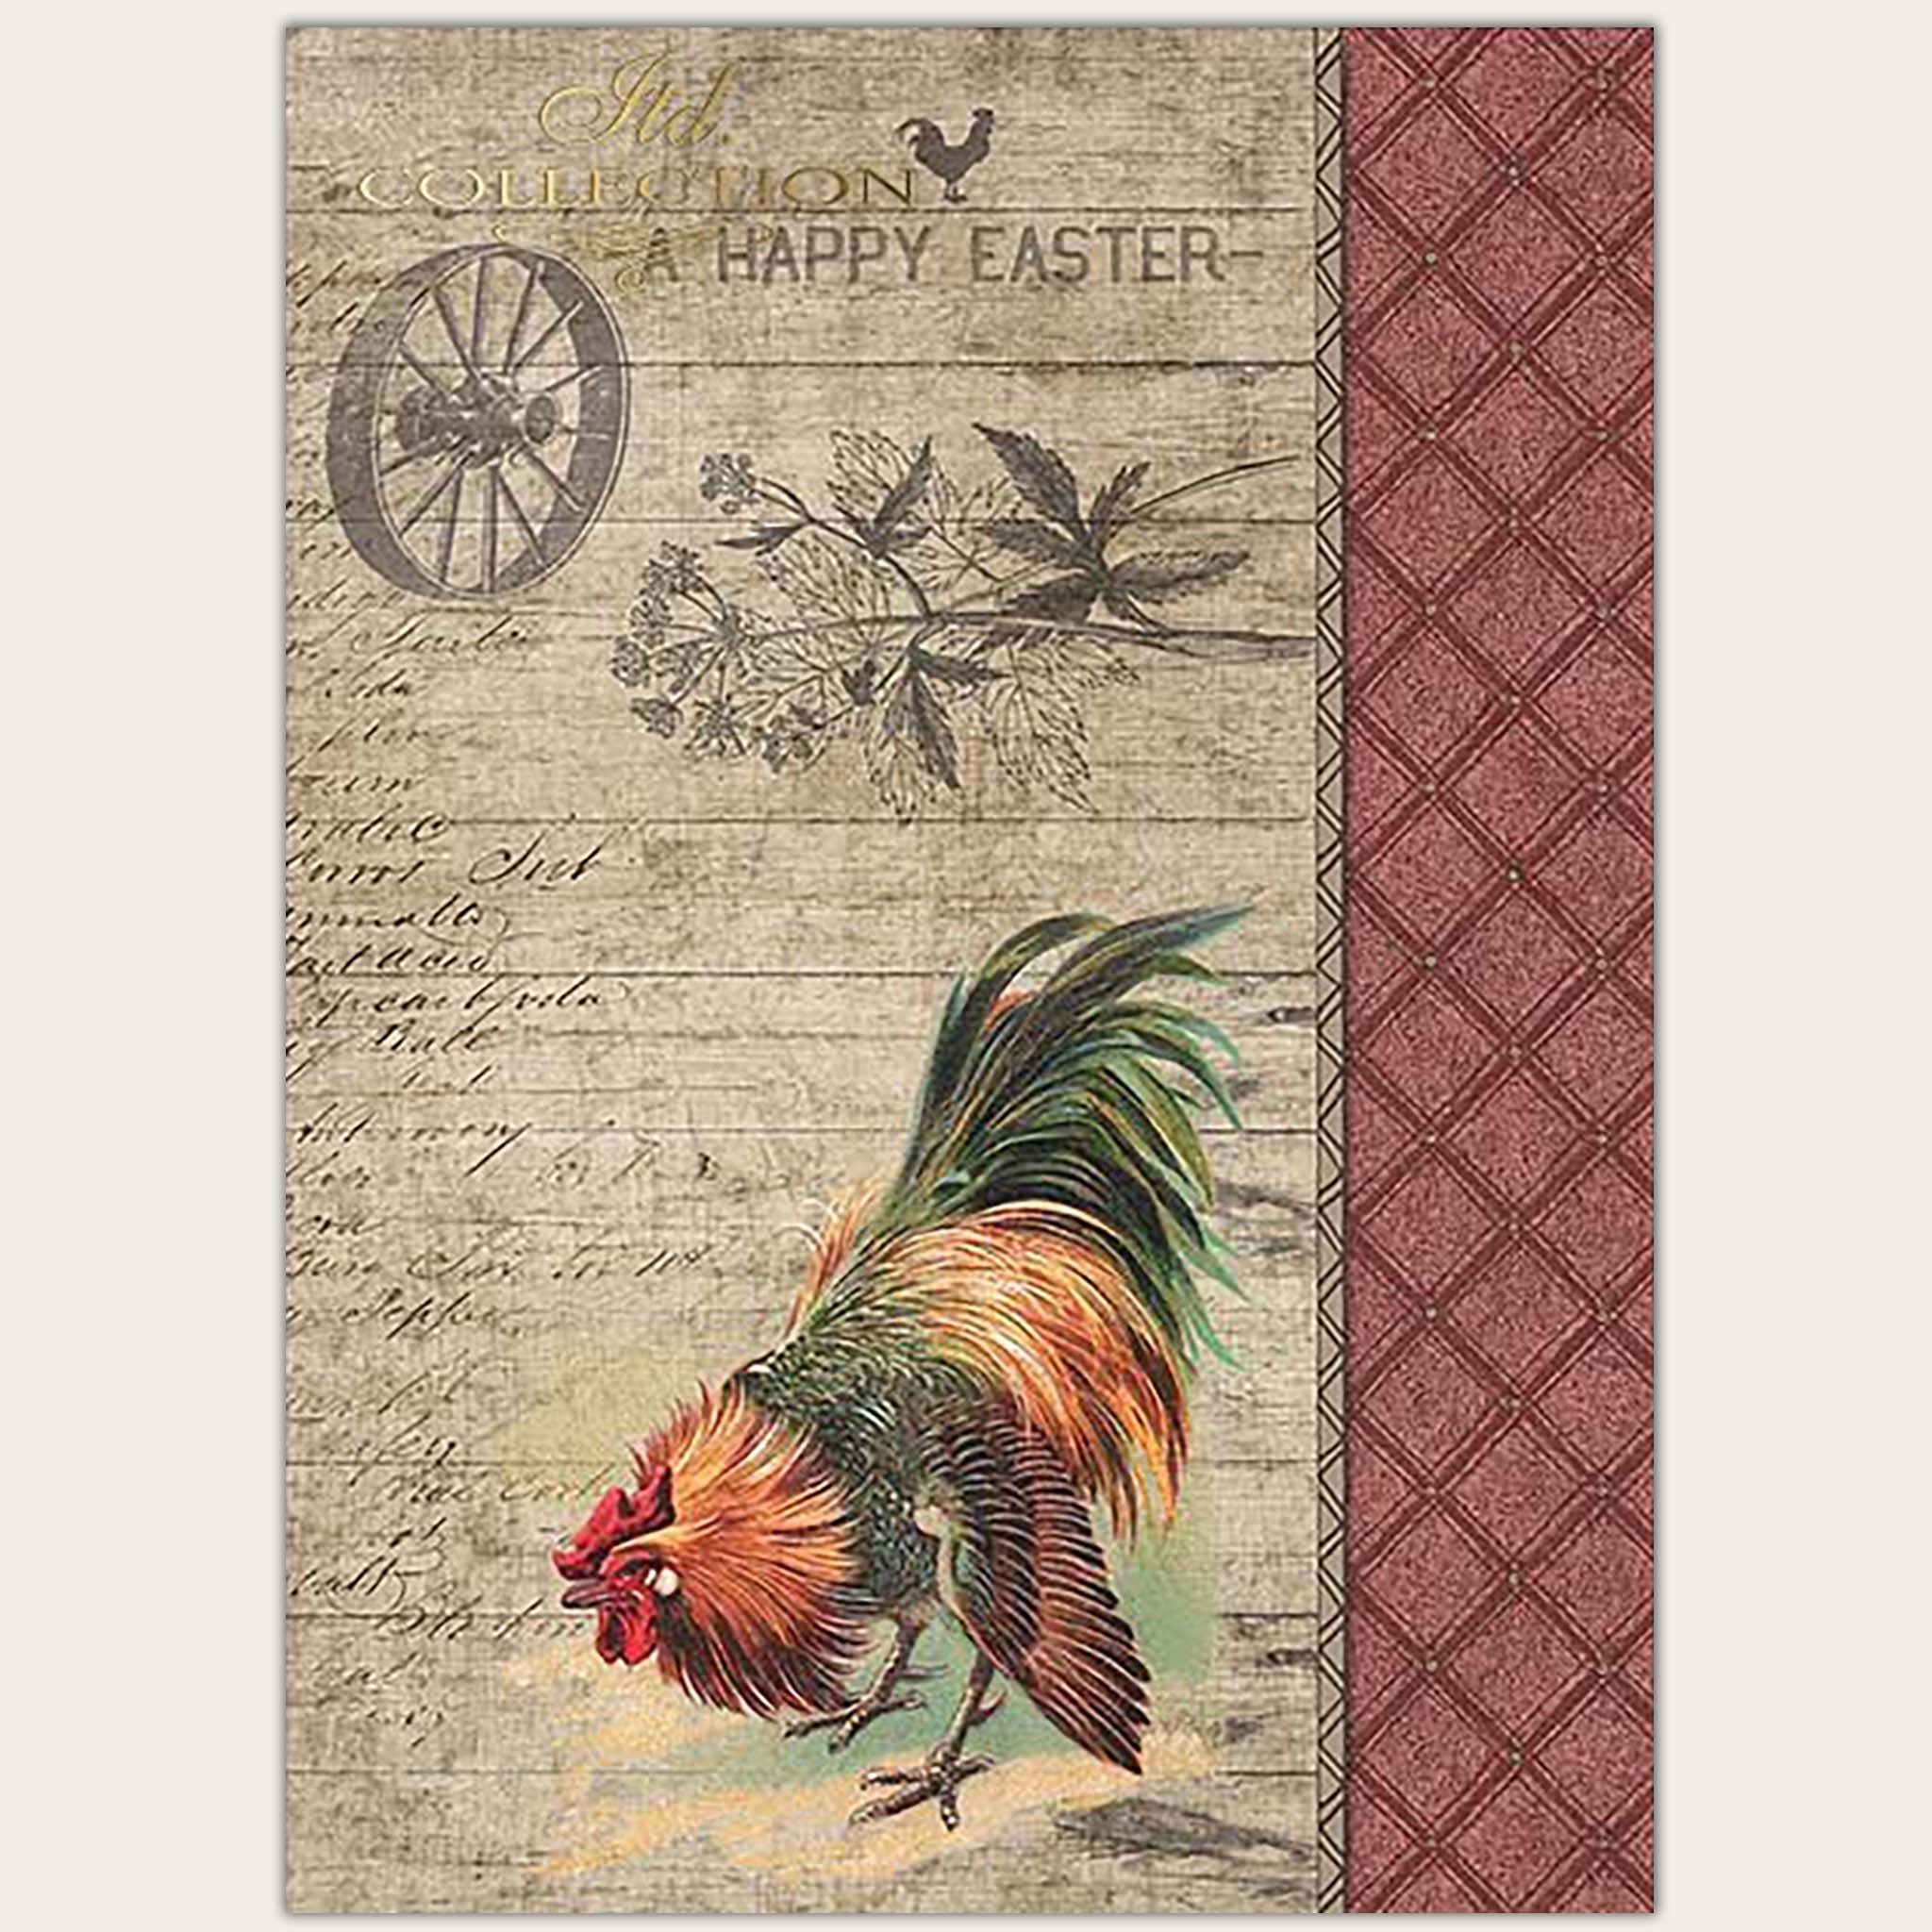 A4 rice paper design that features a rooster against a wood background that says: A Happy Easter. On the right side of the design is a repeating red diamond pattern.